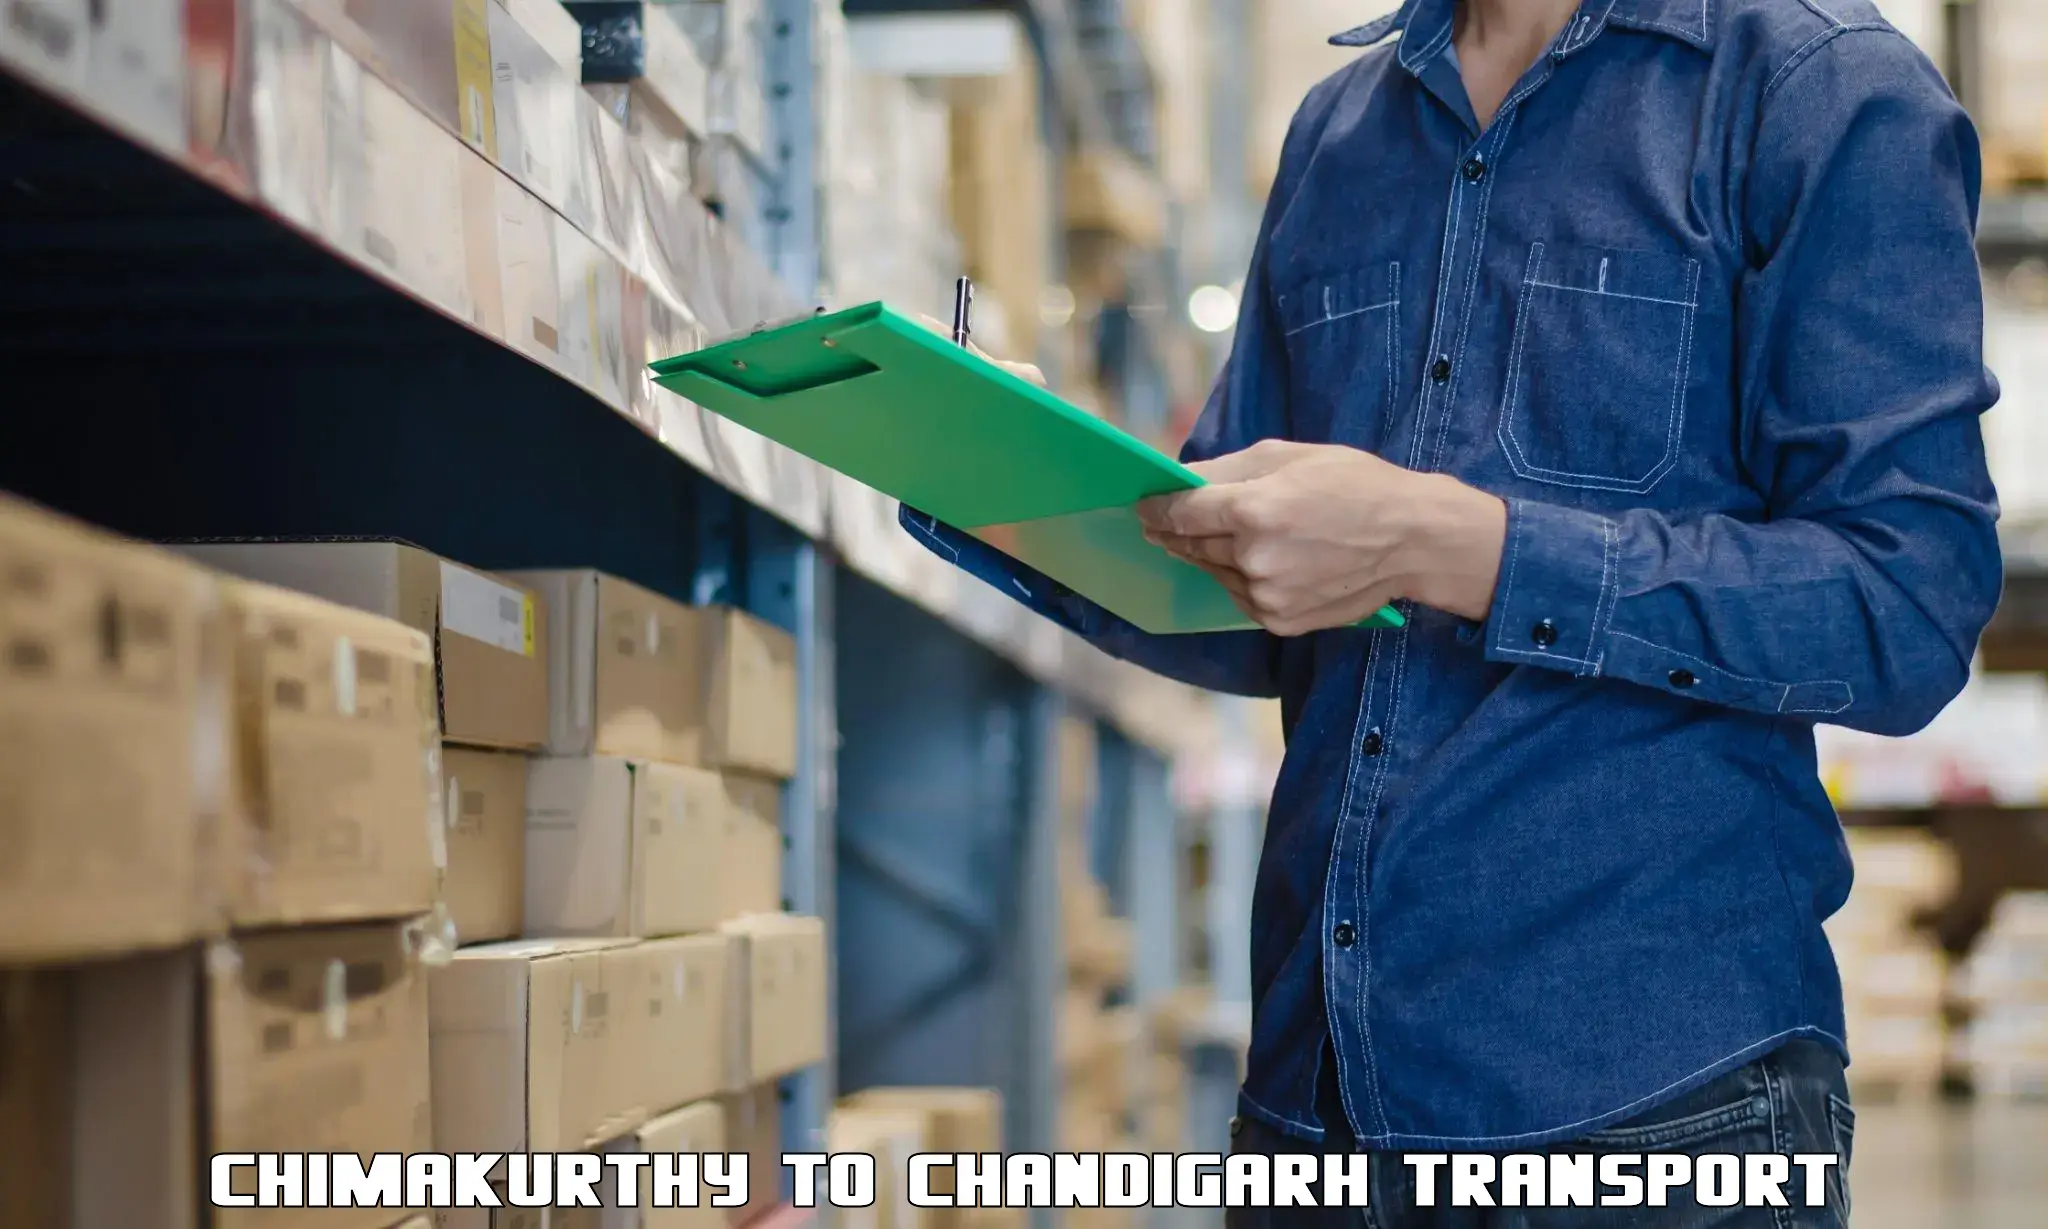 Interstate transport services in Chimakurthy to Chandigarh